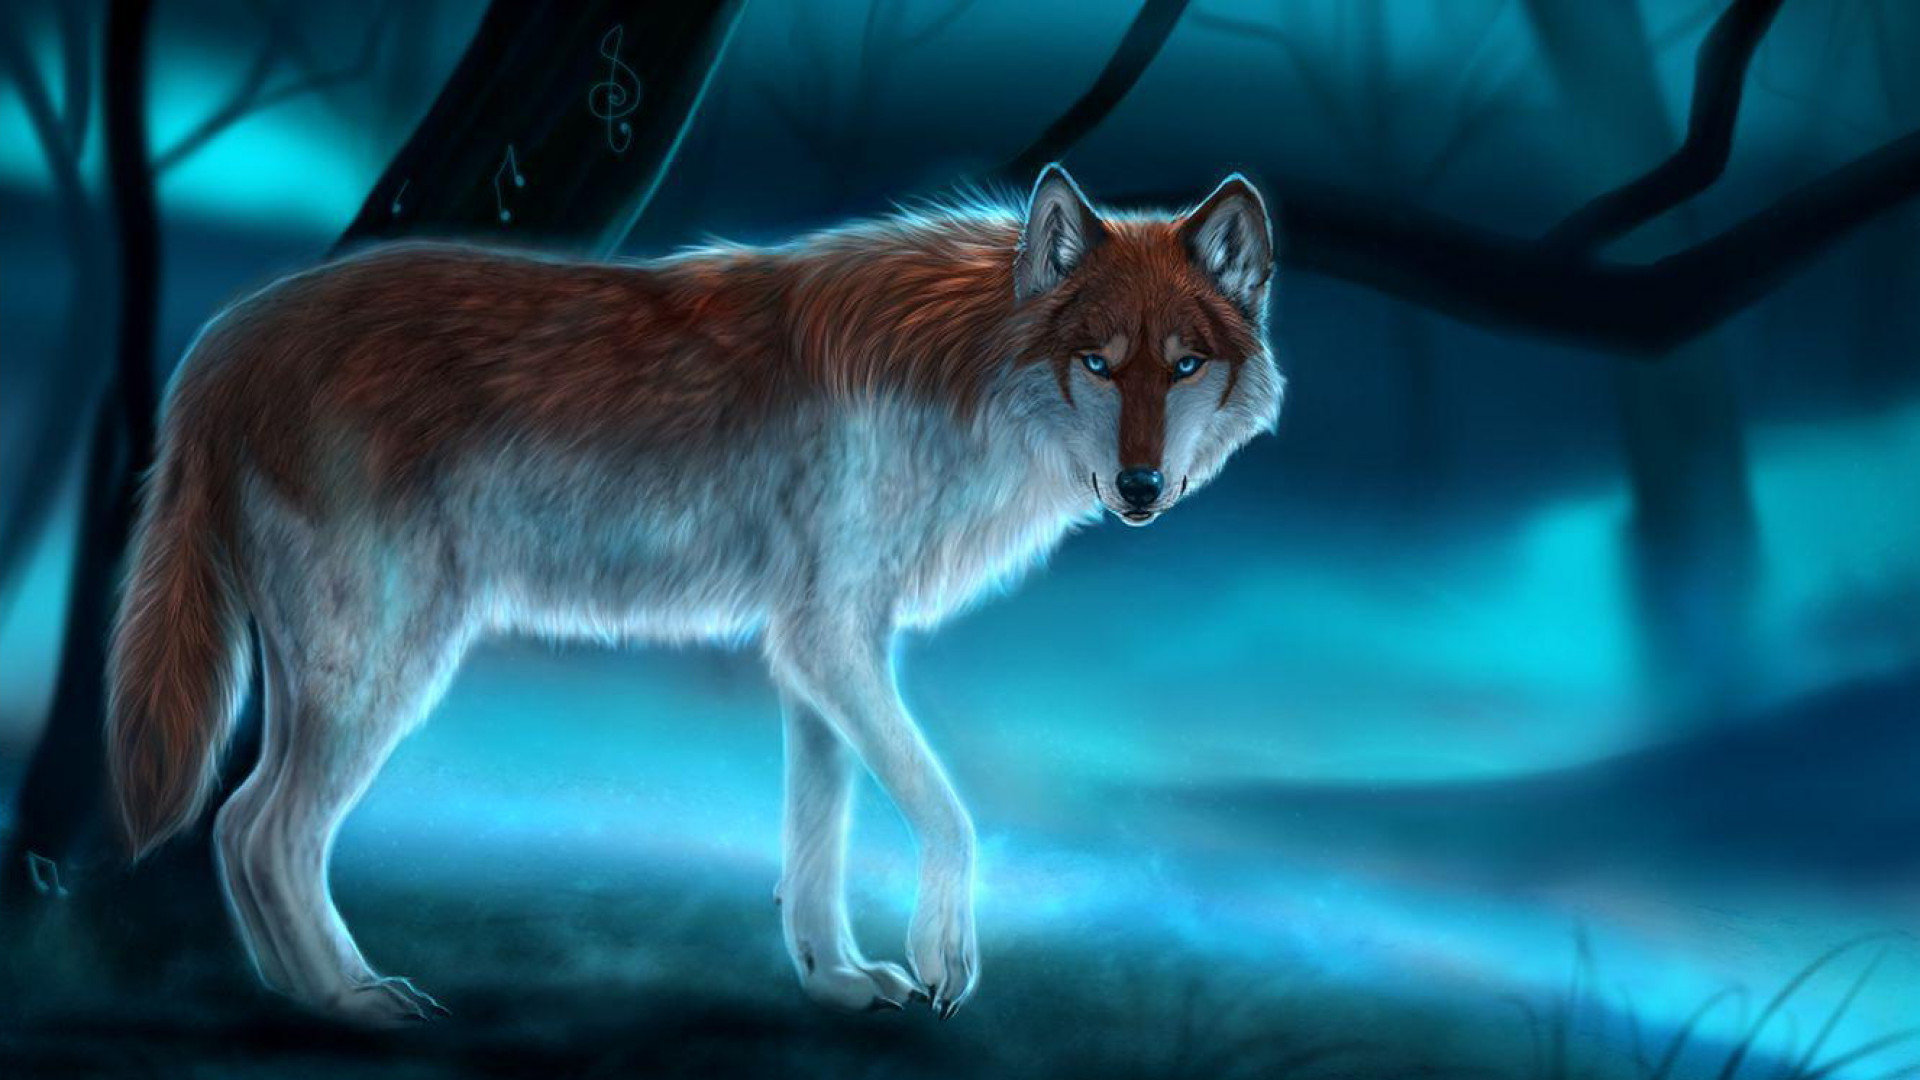 Download hd 1920x1080 Wolf desktop background ID:117892 for free